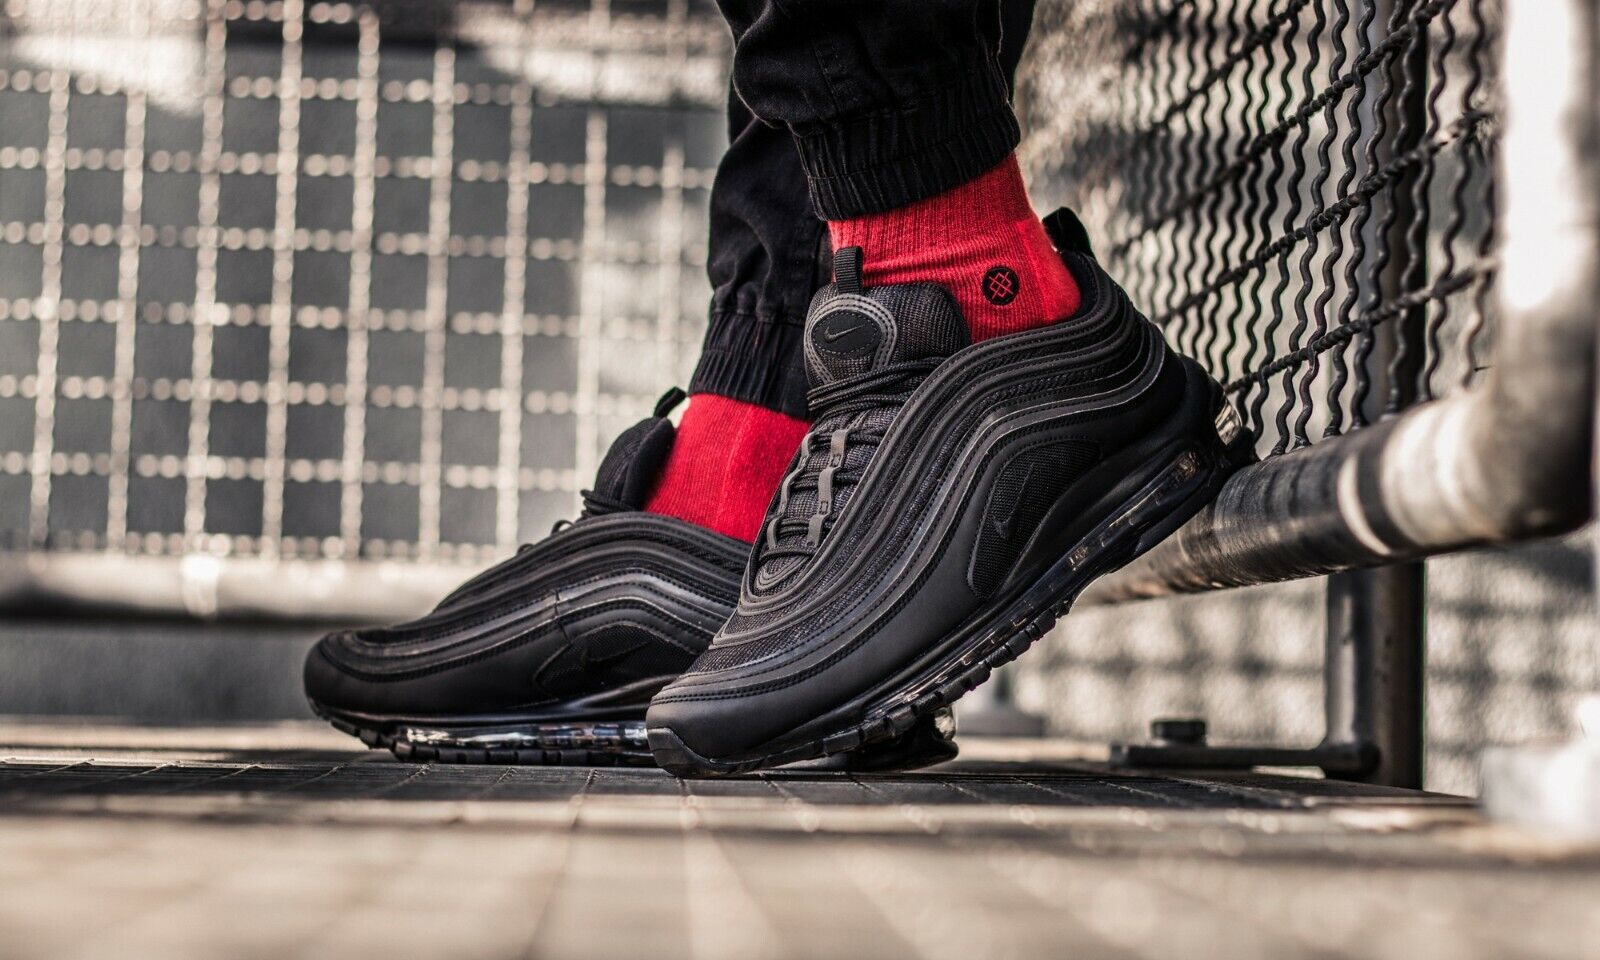 Undefeated x Nike Air Max 97s May Be Releasing Soon